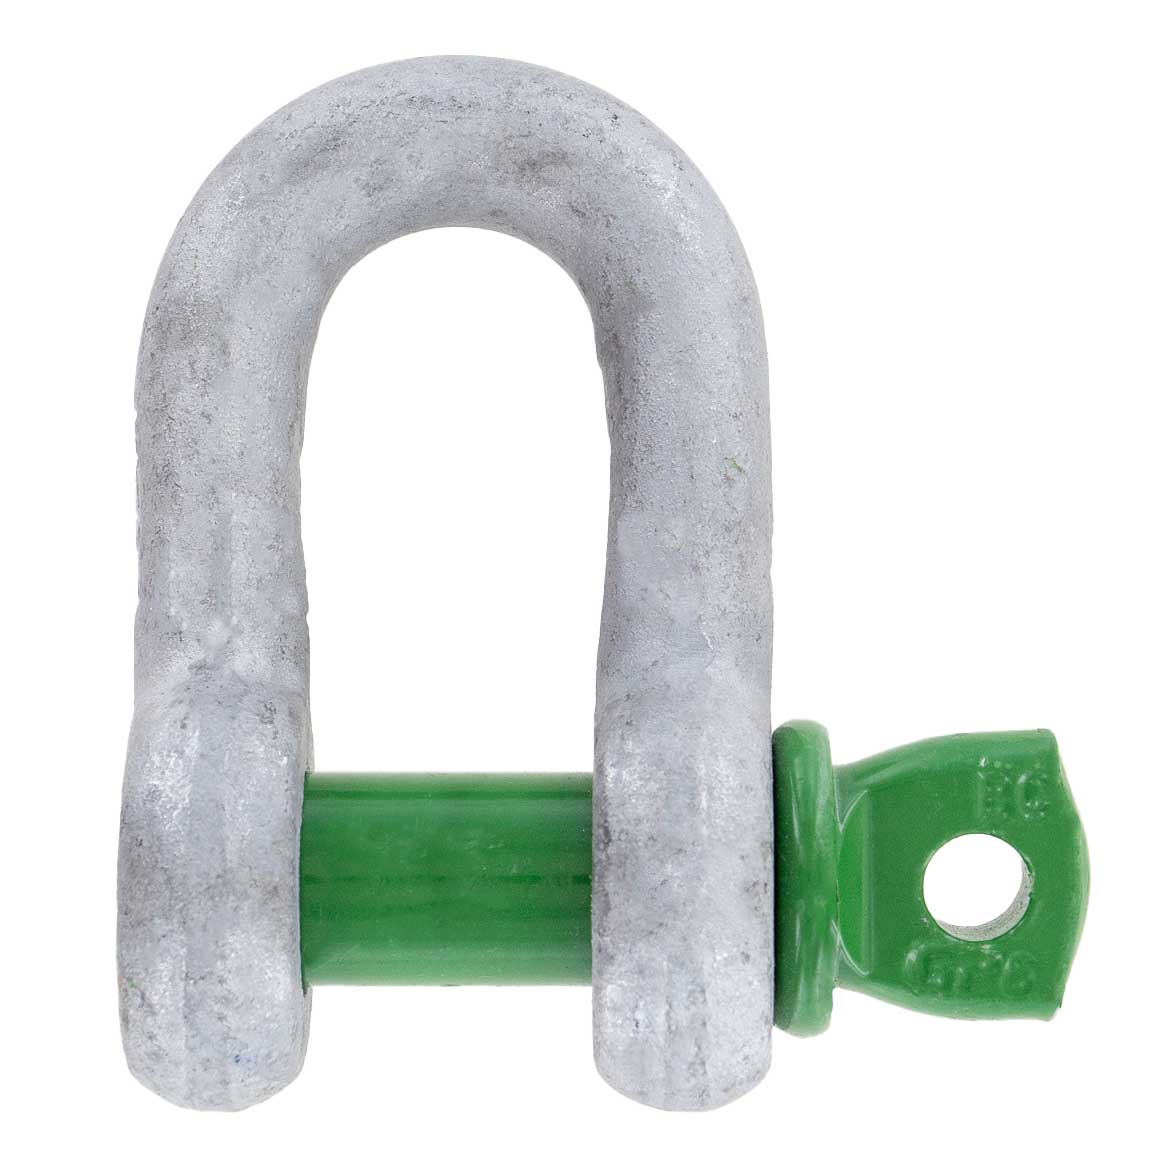 3/4" Van Beest Green Pin® Screw Pin Chain Shackle | G-4151 - 4.75 Ton primary image